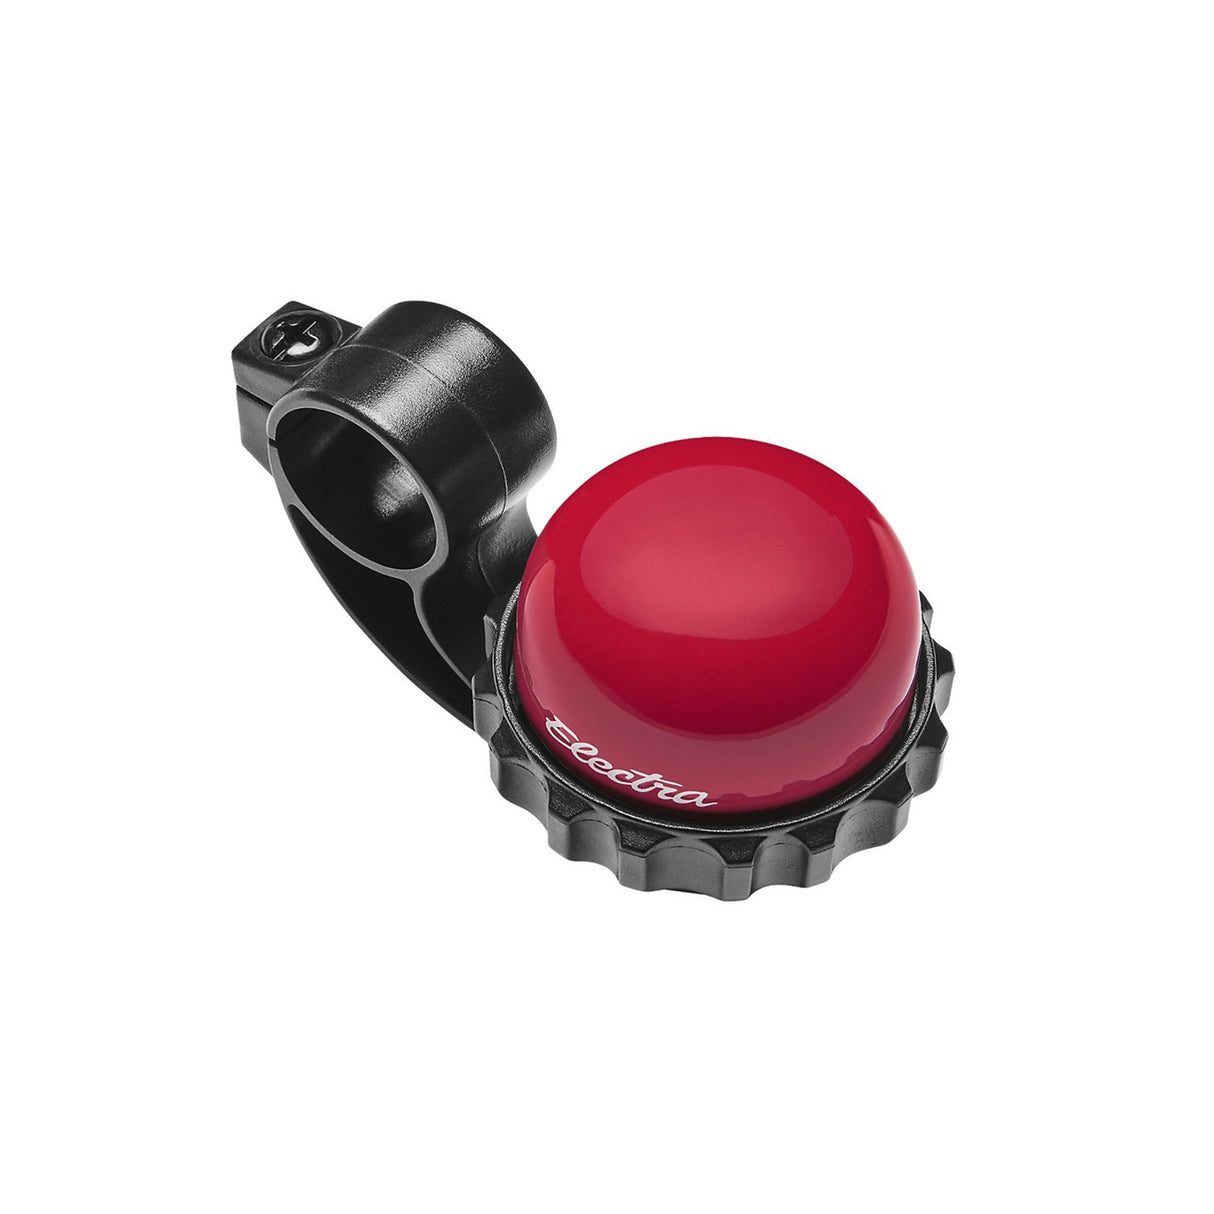 Electra Twister Bell Chili Red Bike Bell